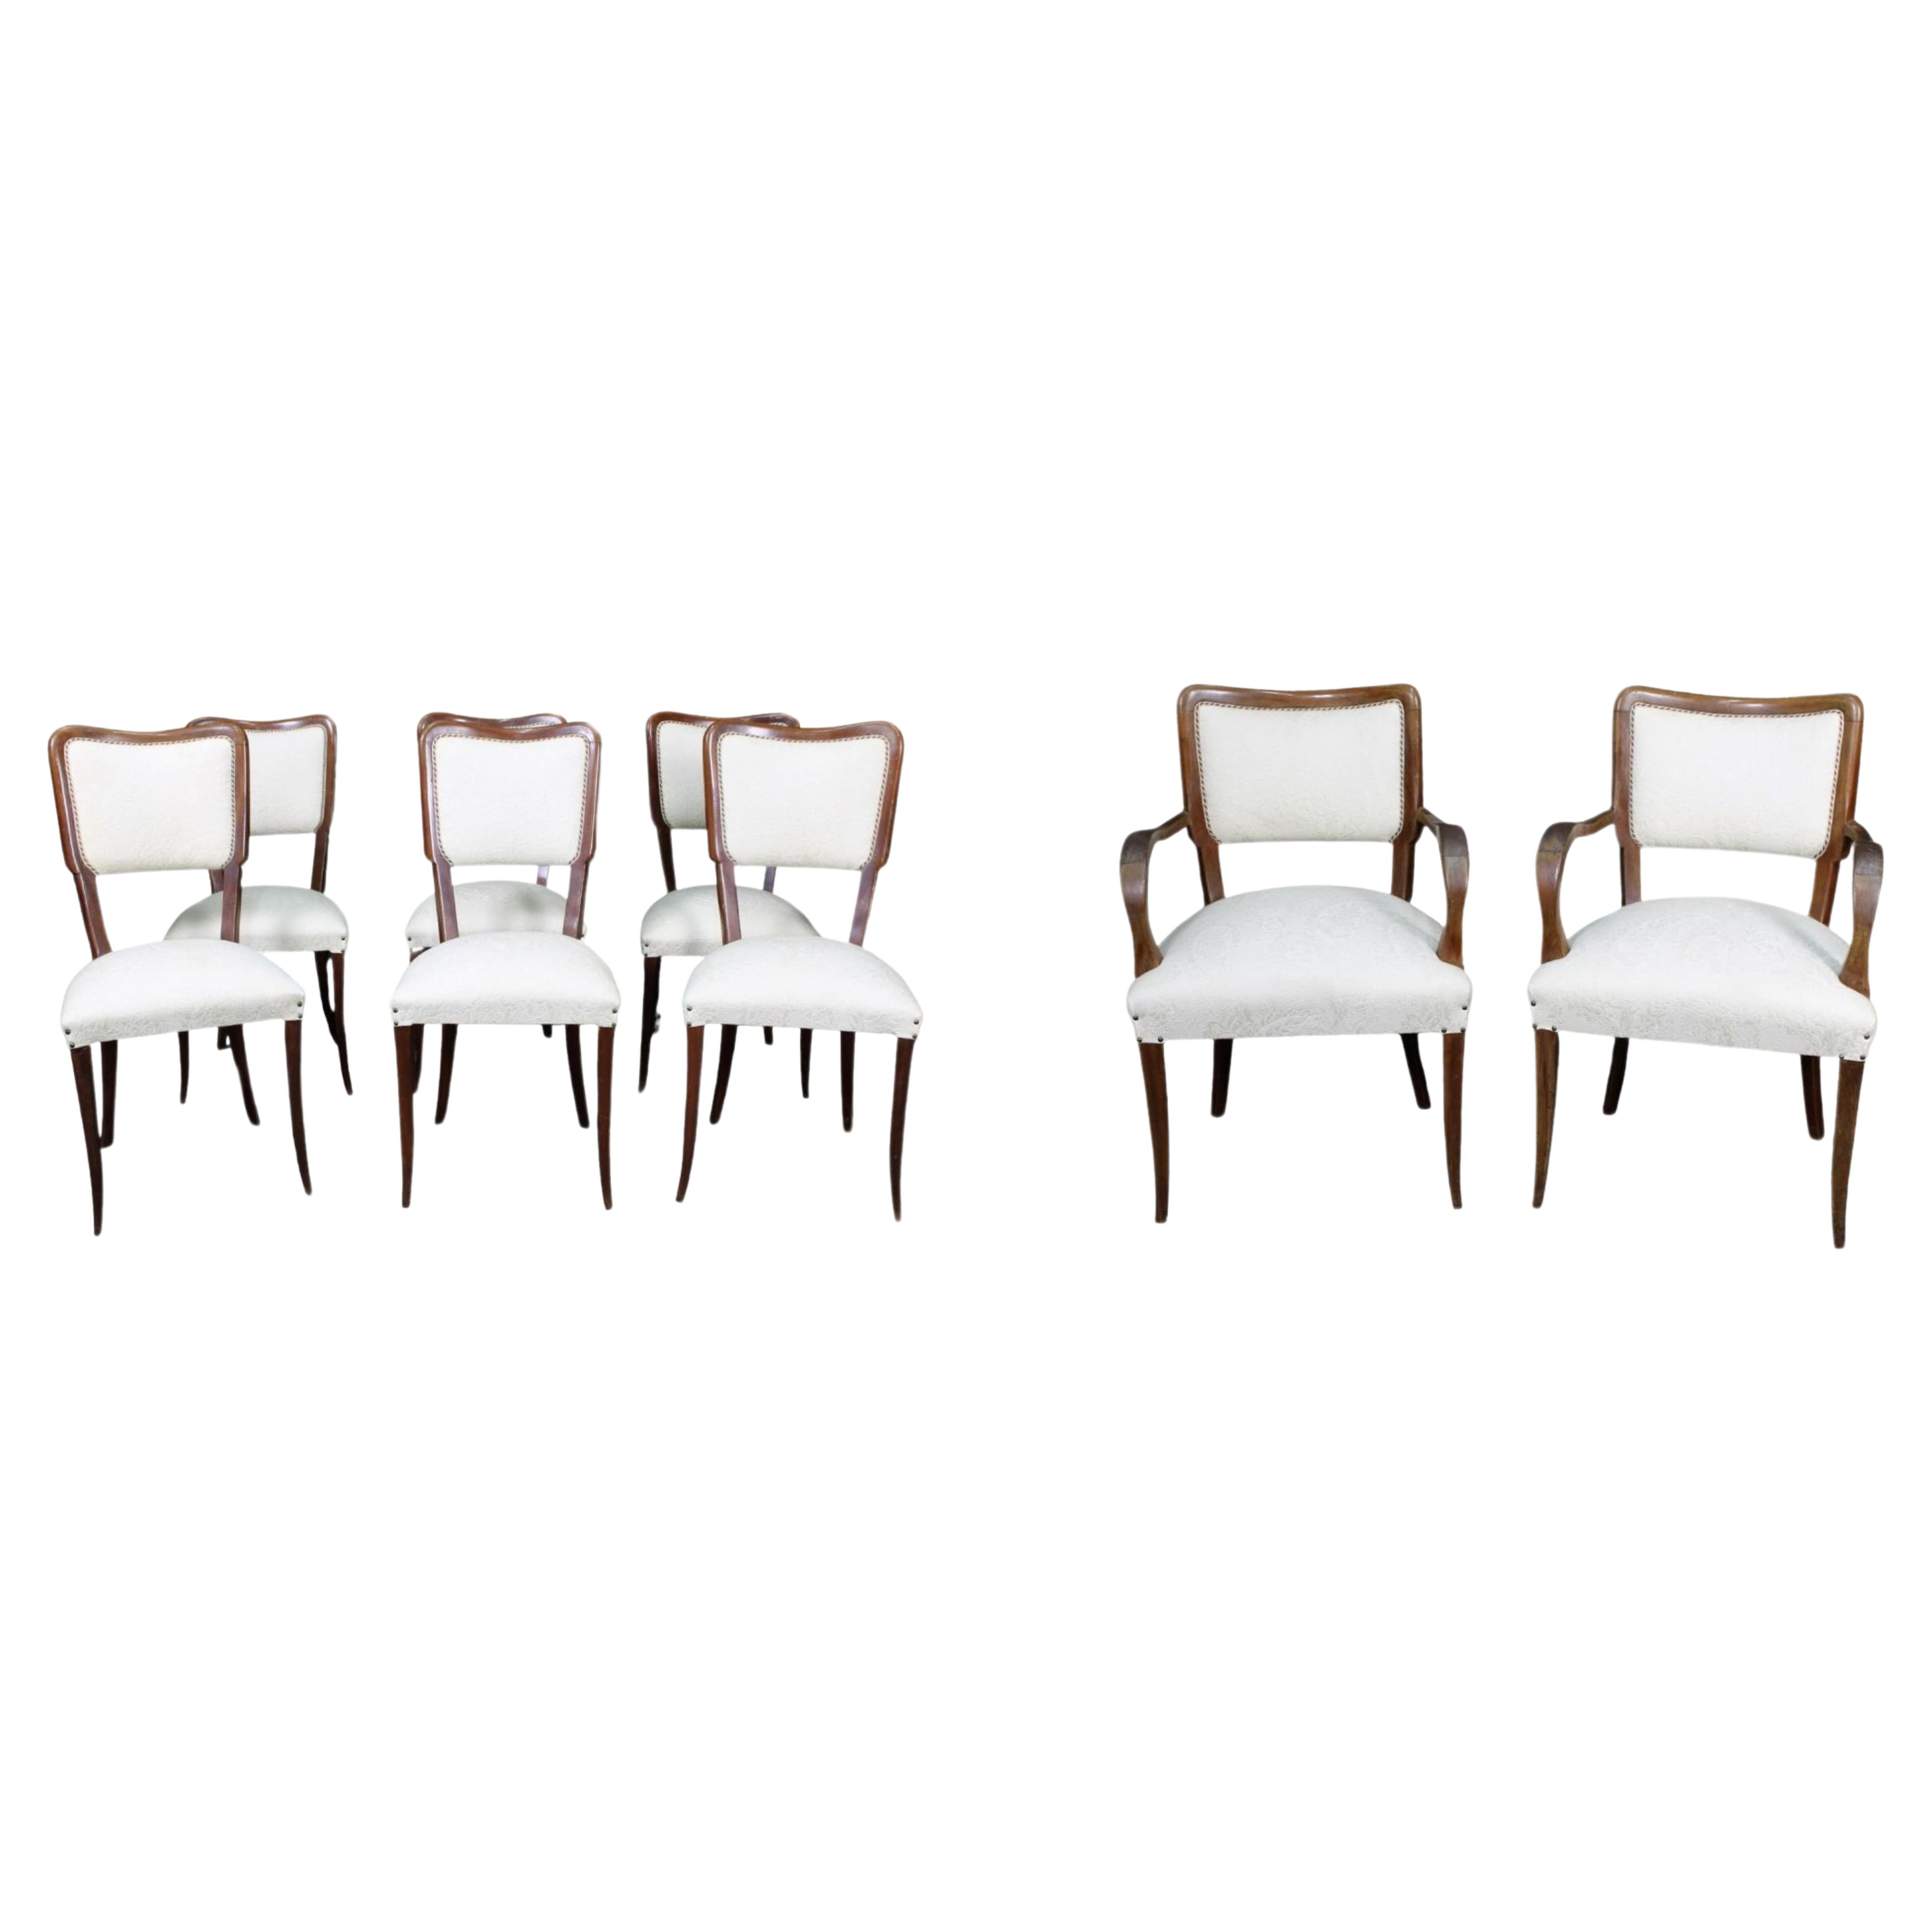 Six Chairs with a Pair of 20th Century Italian Armchairs